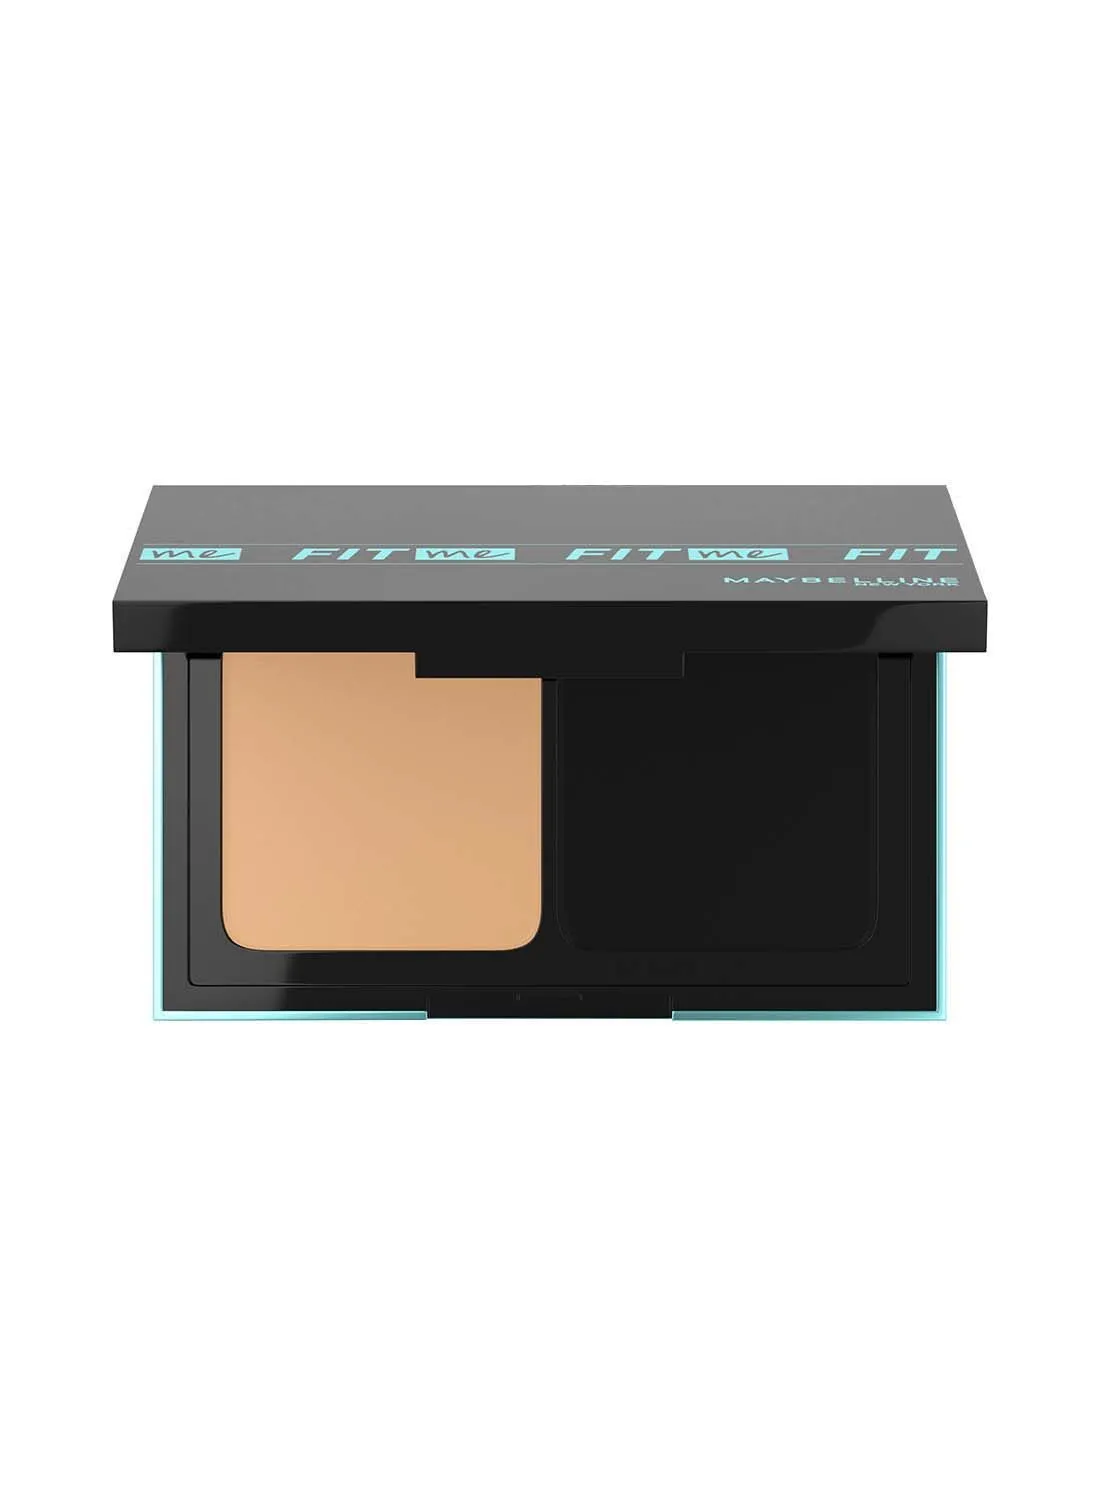 MAYBELLINE NEW YORK Maybelline New York, Fit Me foundation in a powder 228 Soft Tan